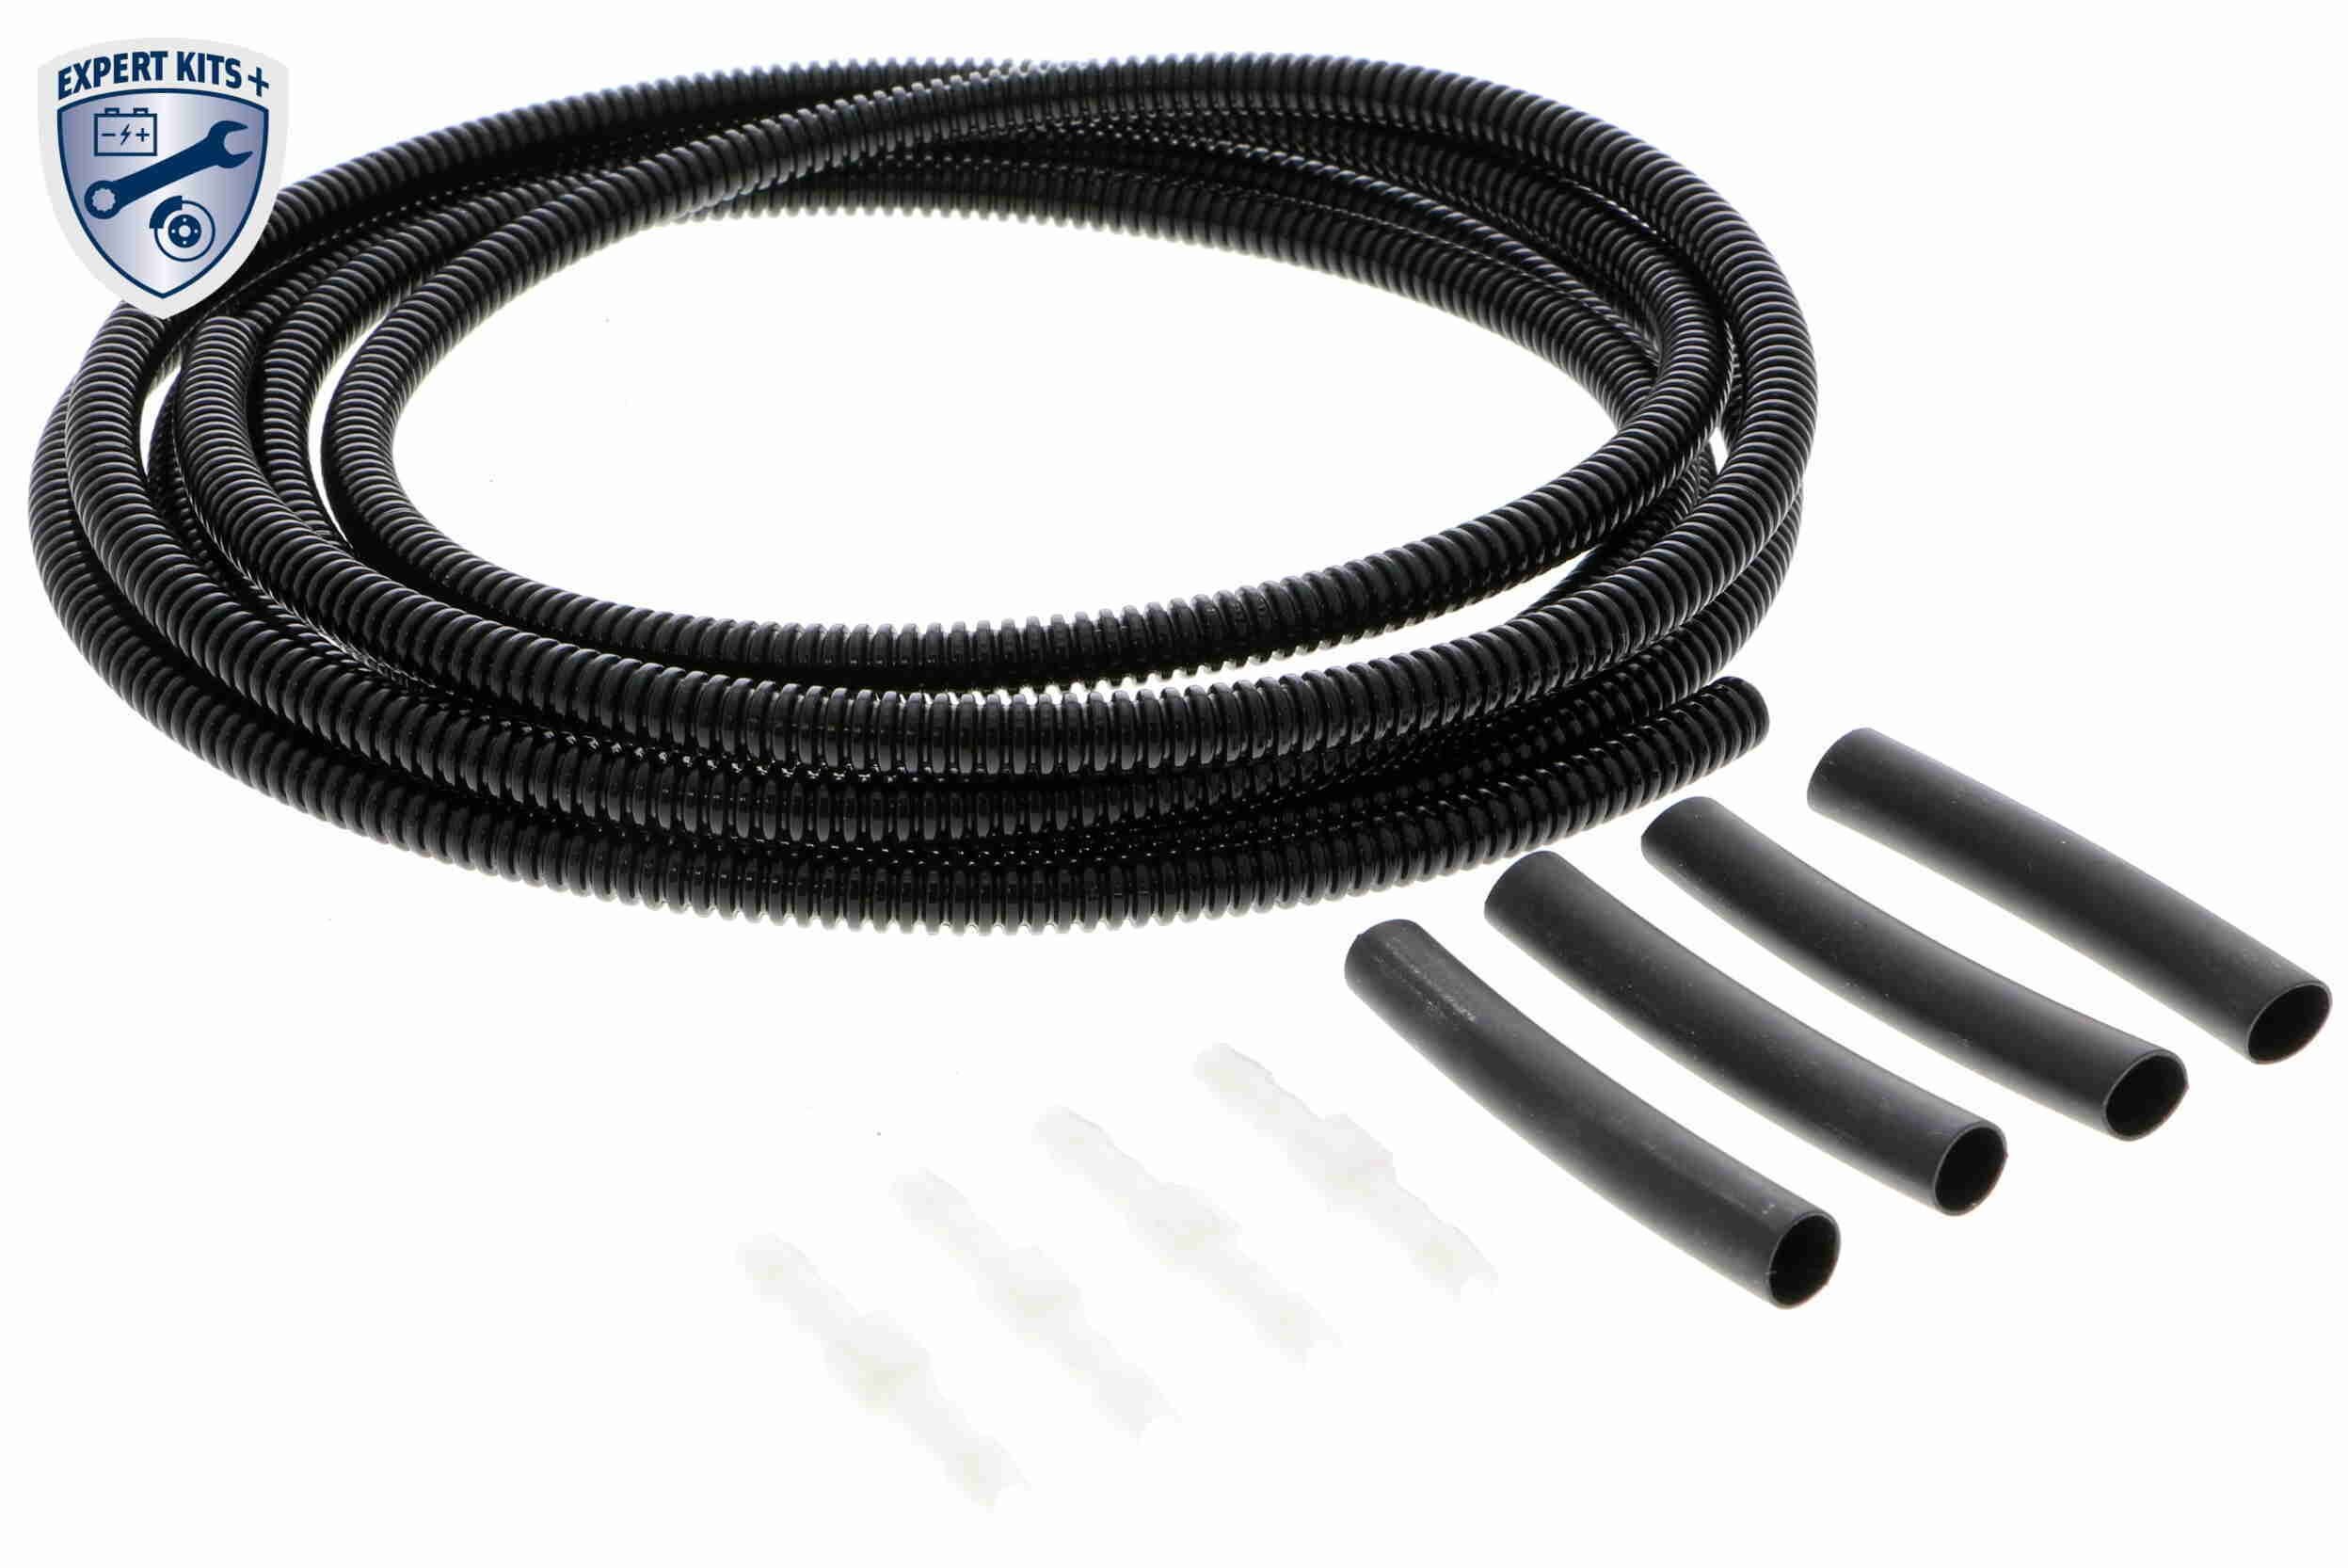 Connector, washer-fluid pipe VEMO EXPERT KITS + - V99-83-0007